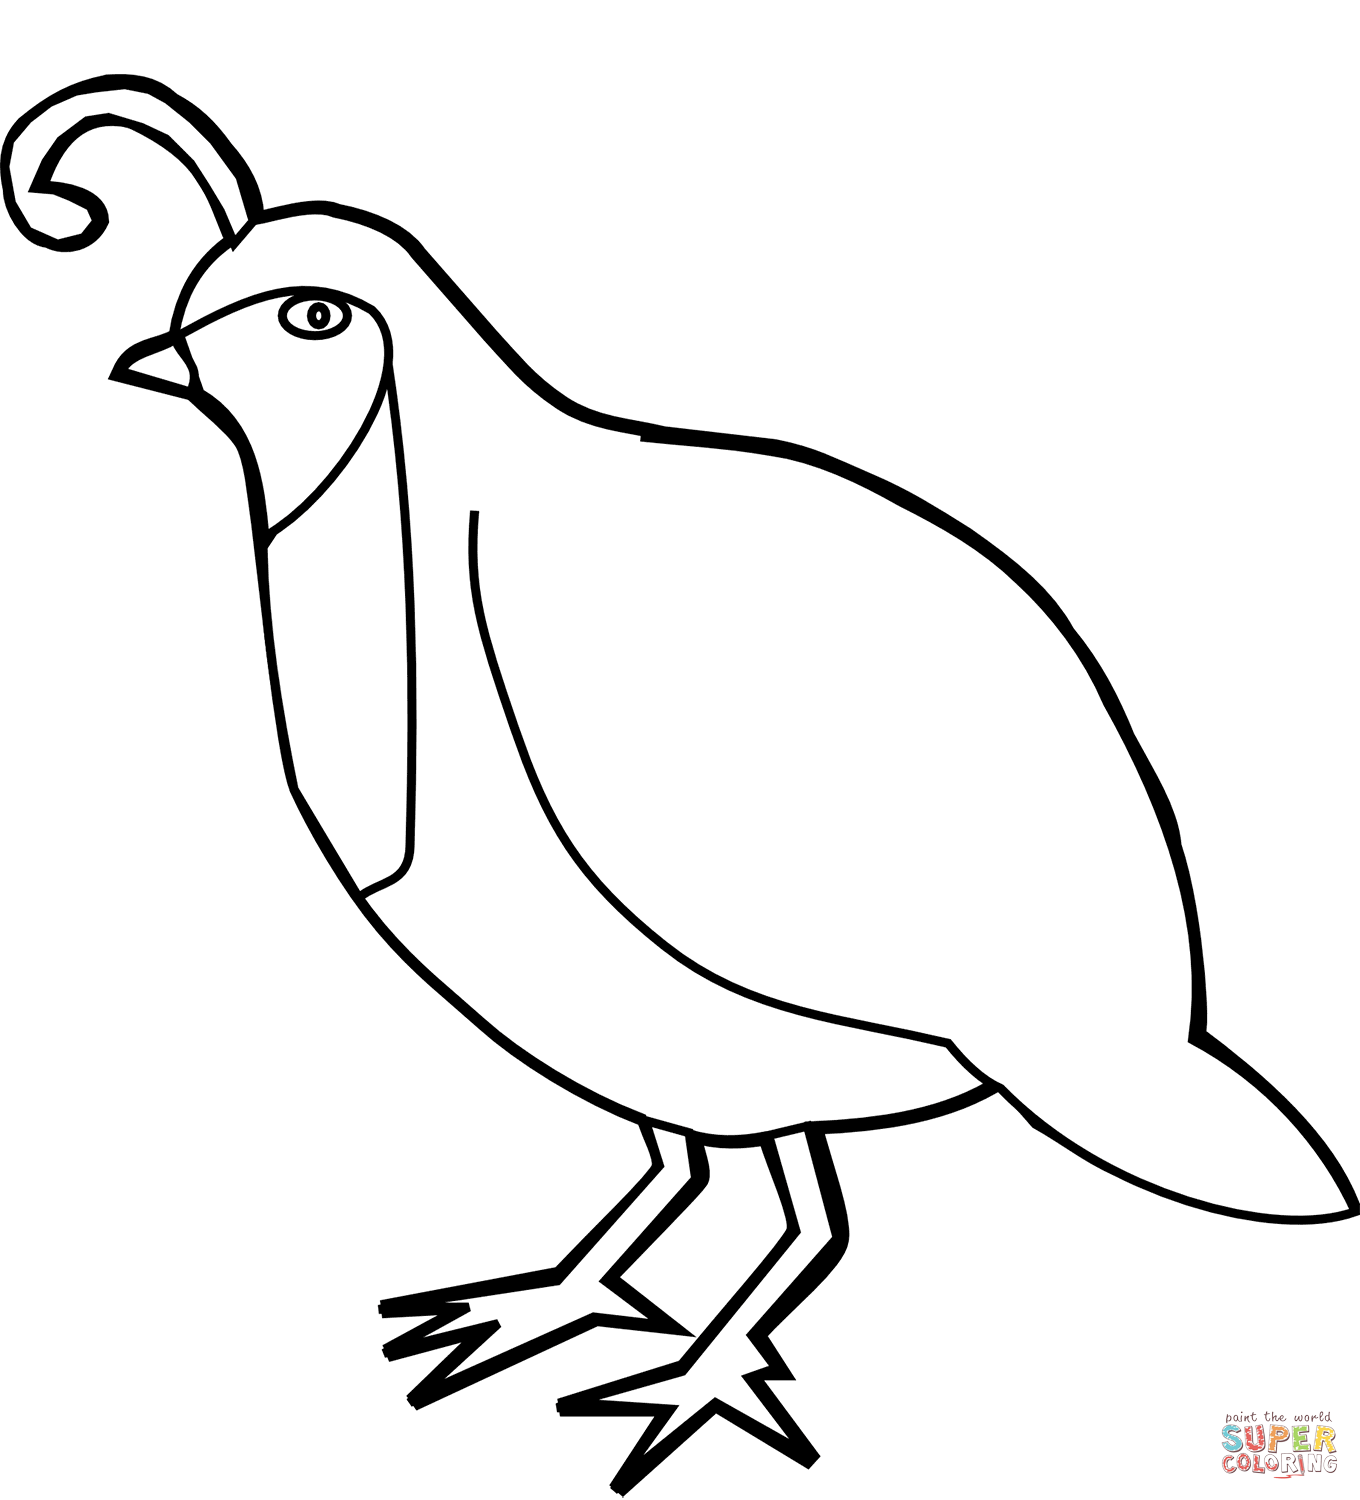 Quail ground dwelling bird coloring page free printable coloring pages